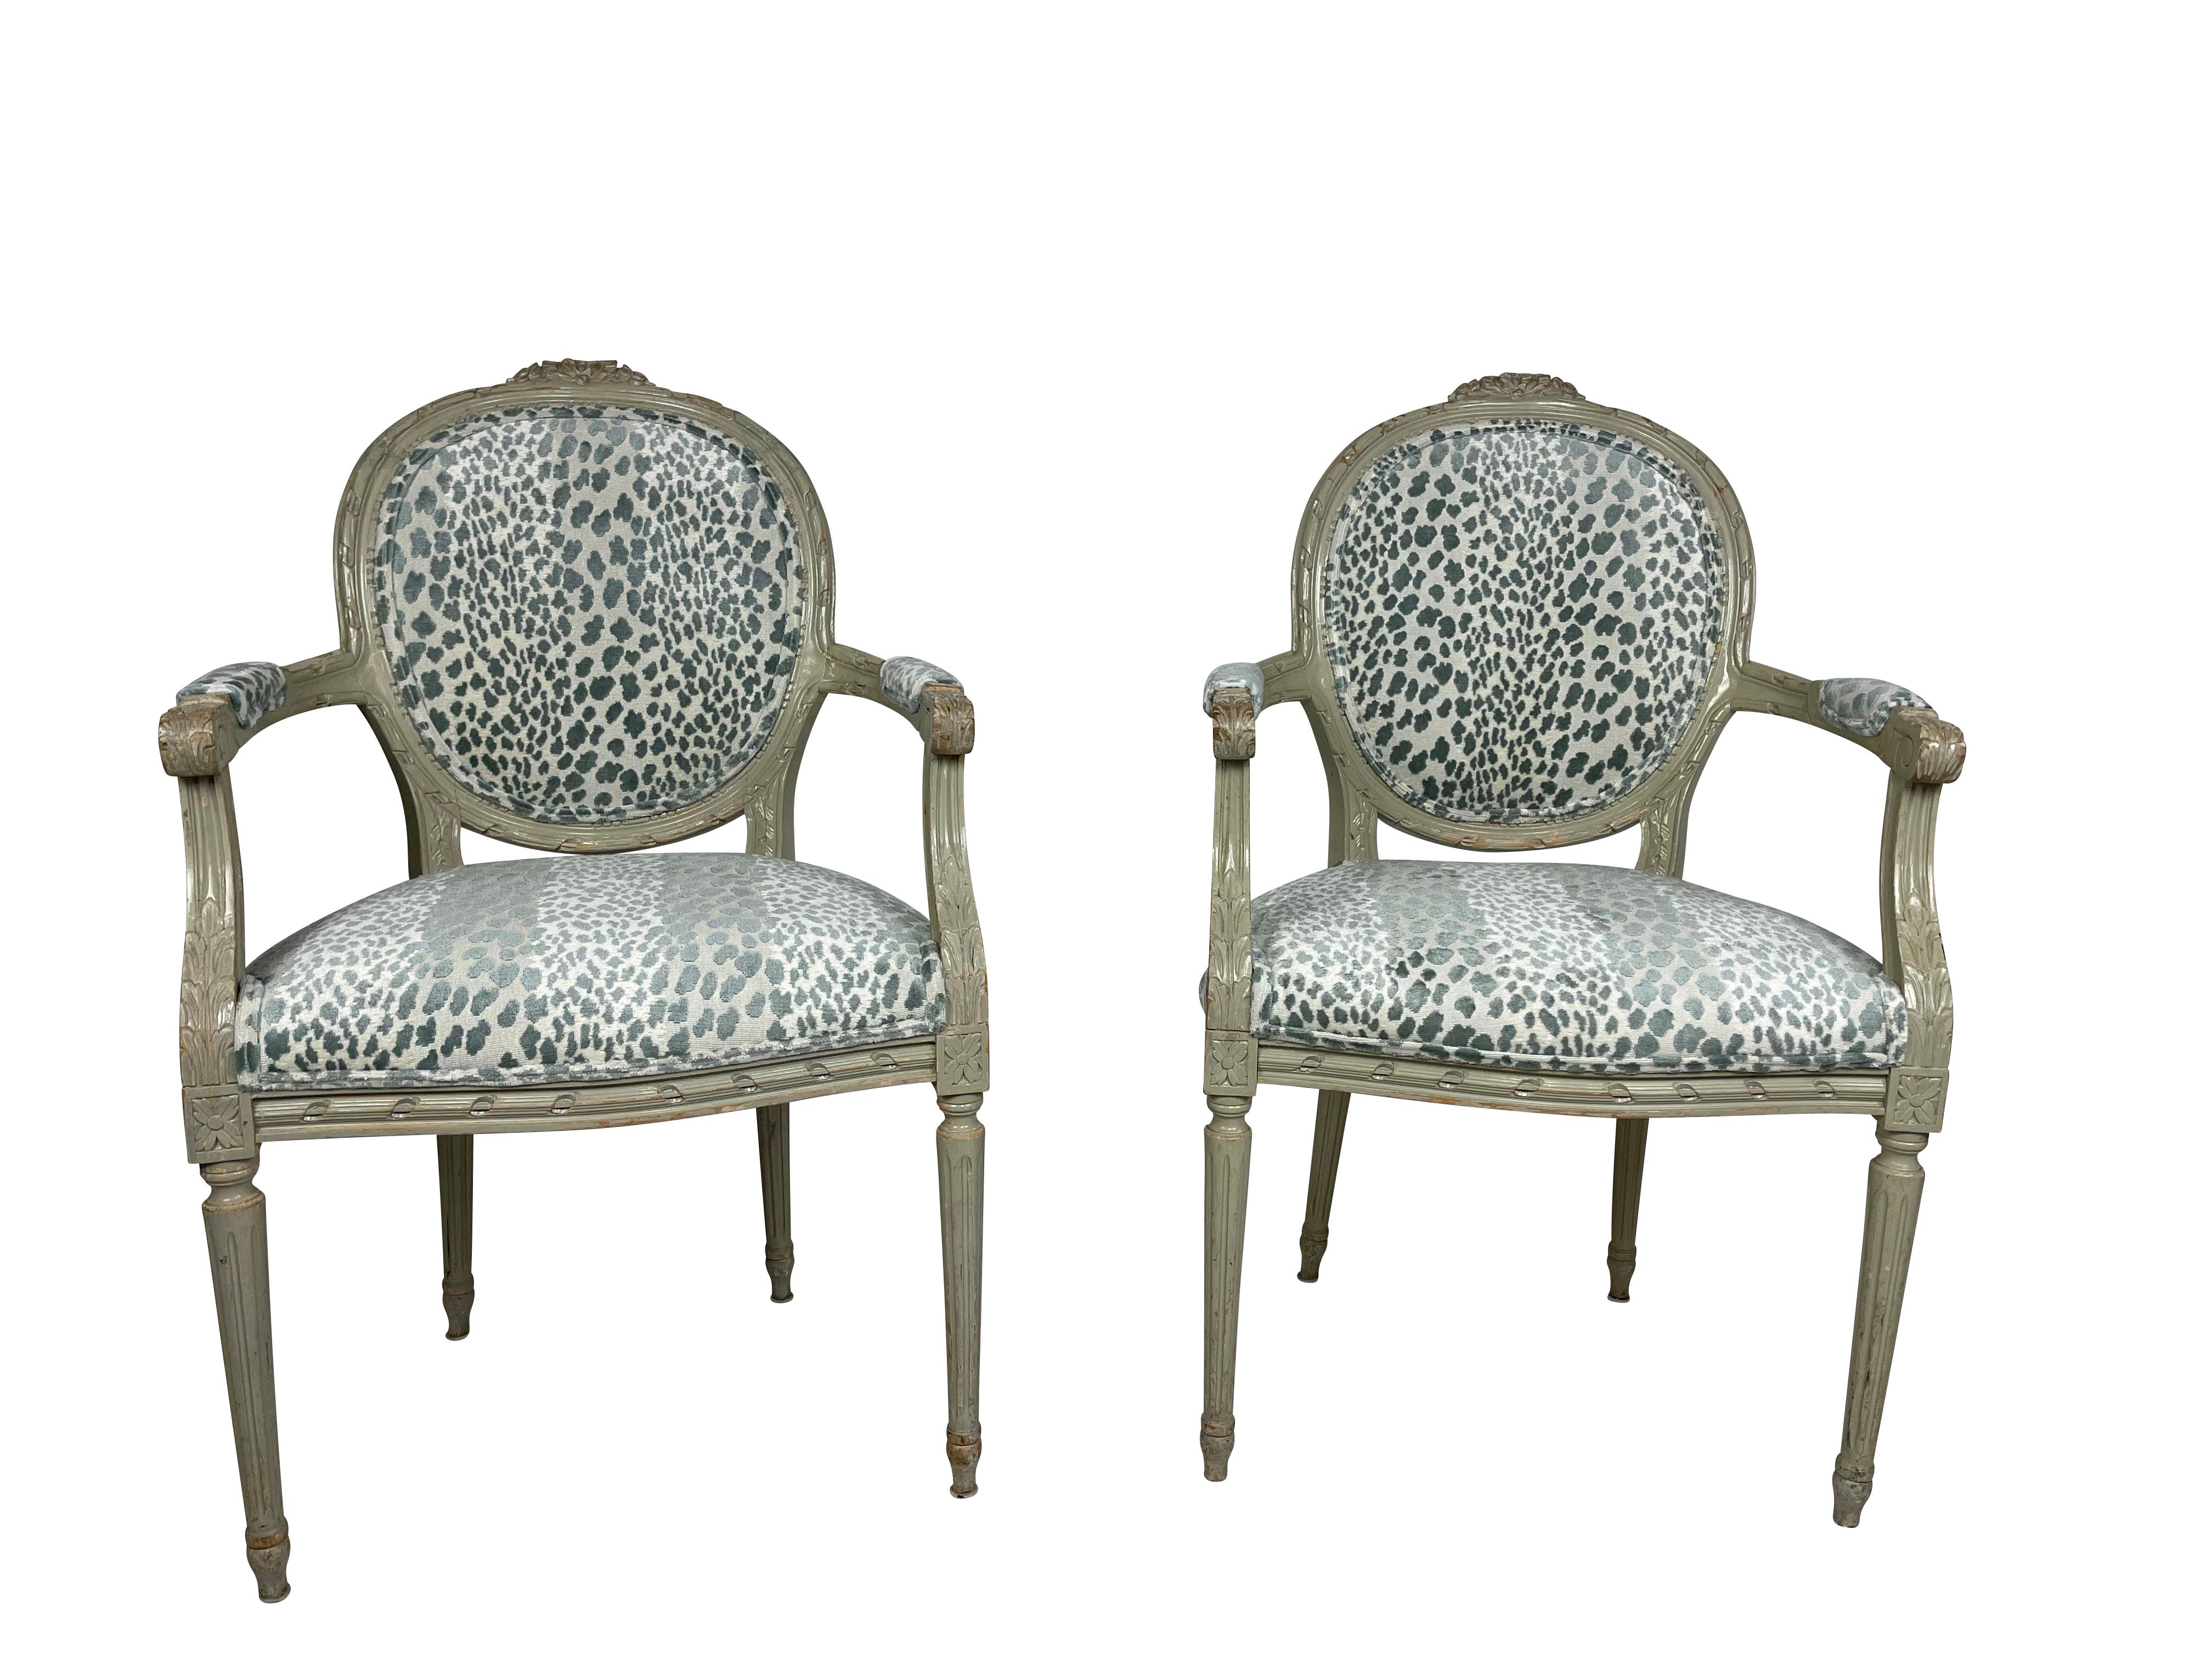 These lovely Louis XVI grey/green painted armchairs are original to the Waldorf Astoria Hotel circa 1930-1940. They have been lovingly restored and reupholstered with a blue/green animal print velvet. They are nicely carved with floral and bow